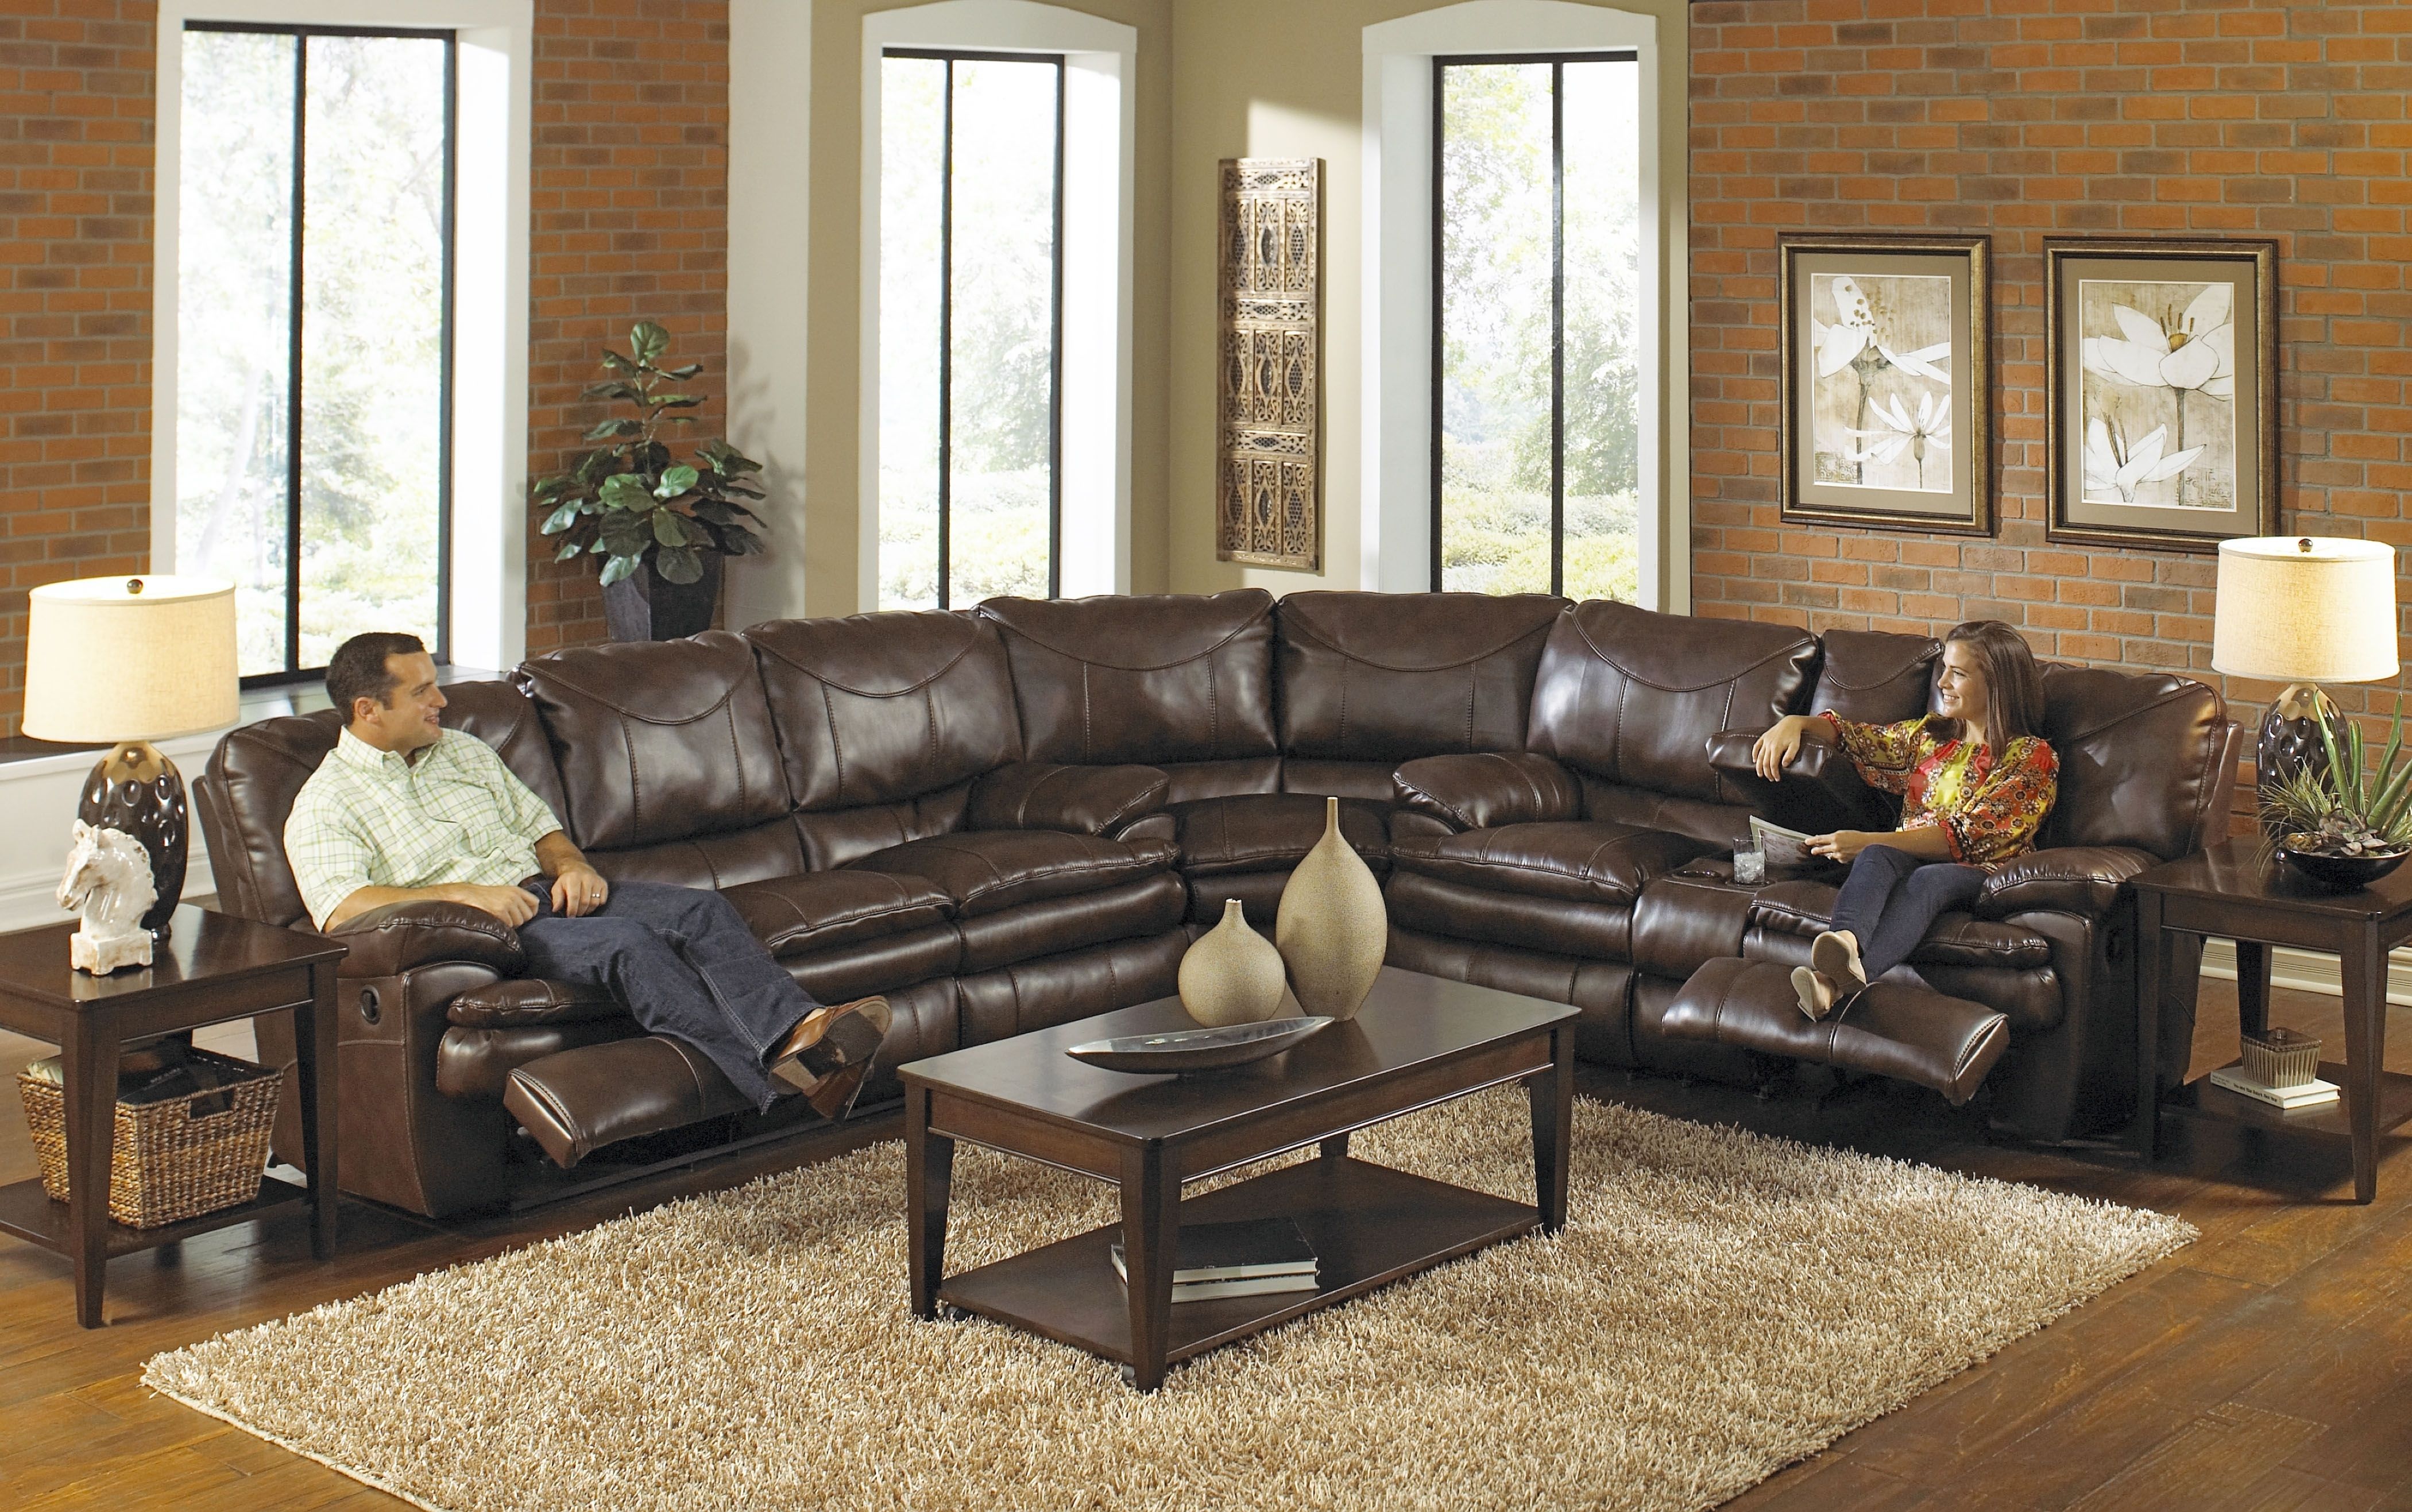 Elegant Reclining Sectional Sofa With Sleeper 88 In Sectional Sofas Intended For Tampa Sectional Sofas (View 10 of 10)